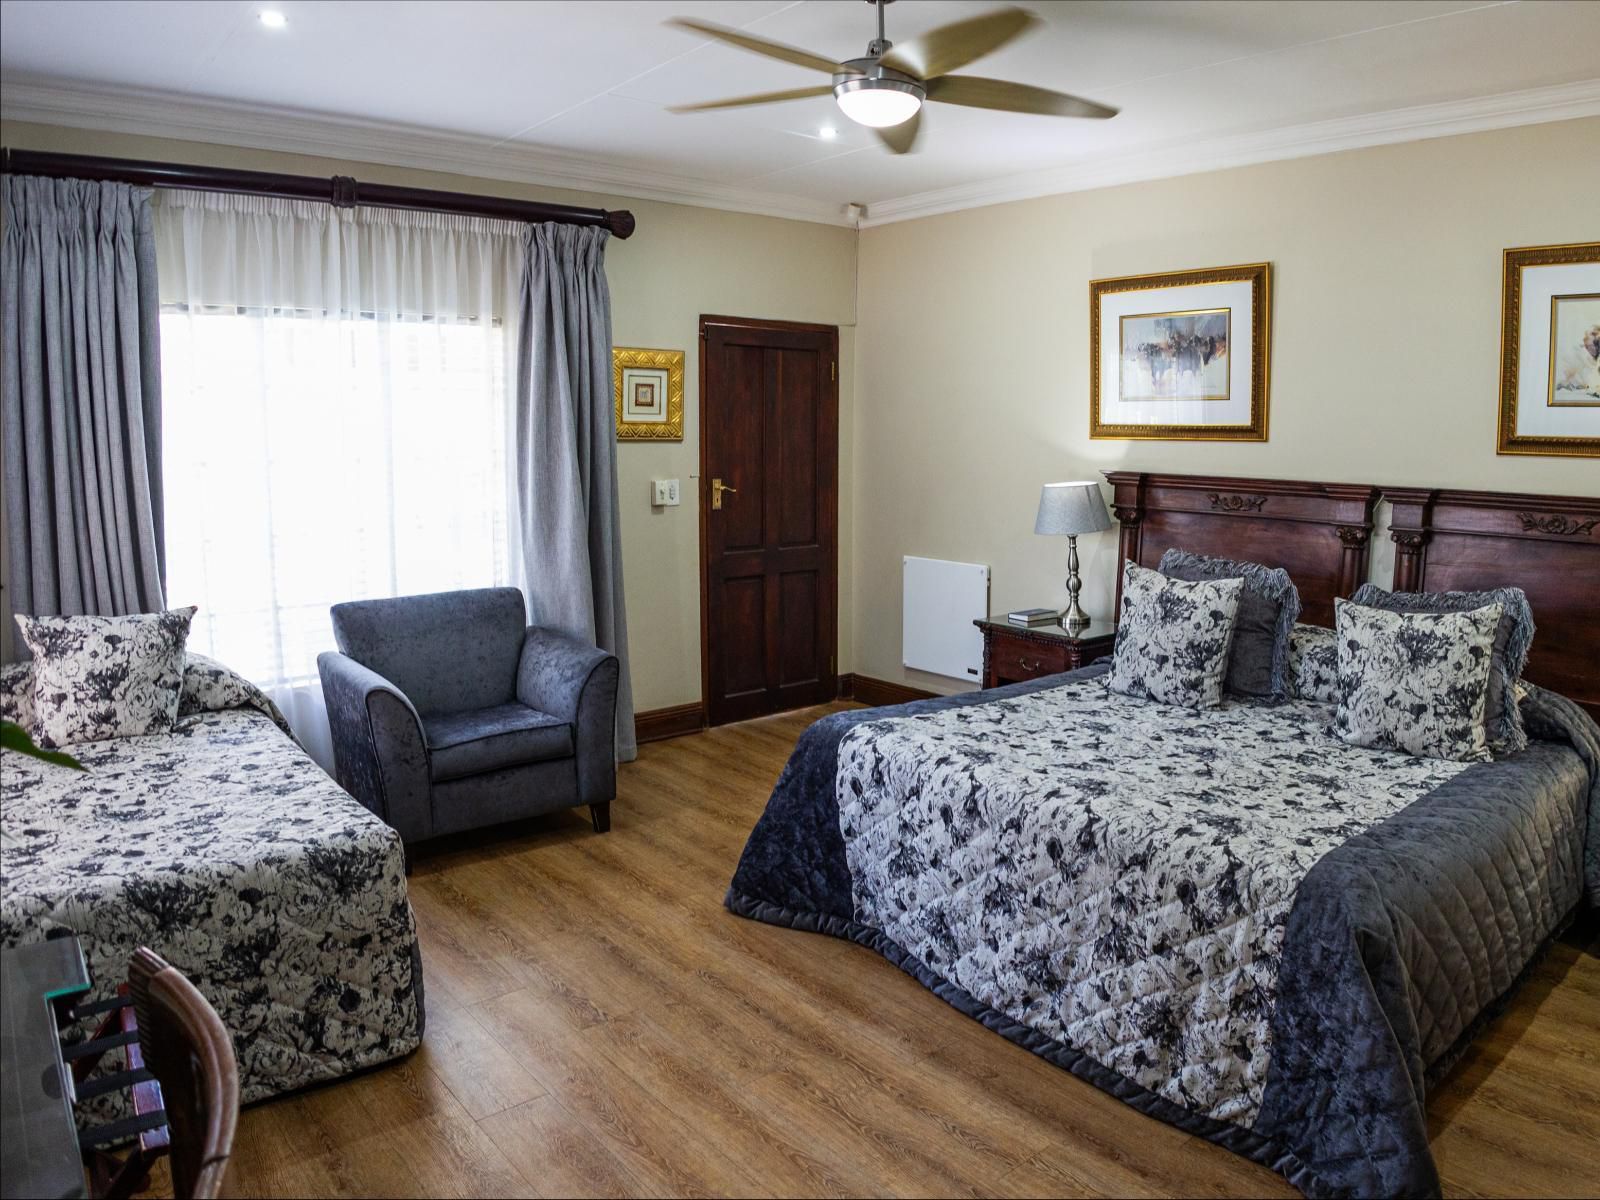 Scott S Manor Guesthouse And Conference Center Lichtenburg North West Province South Africa Bedroom